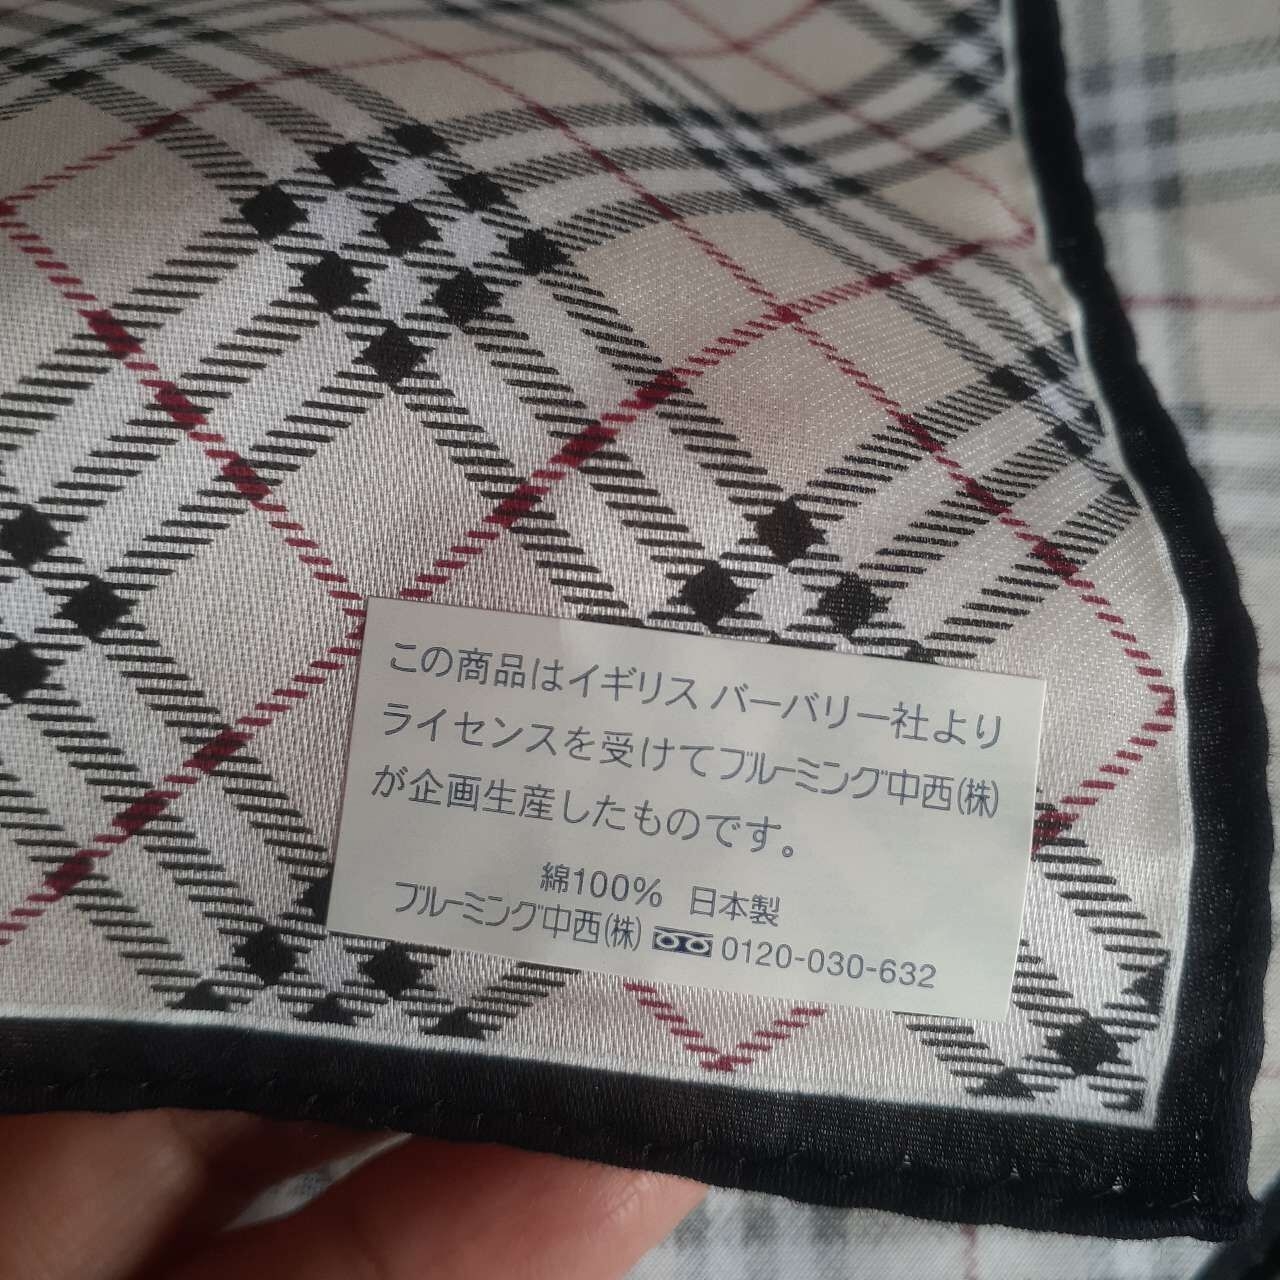 Burberry London Embroidered Logo Scarf